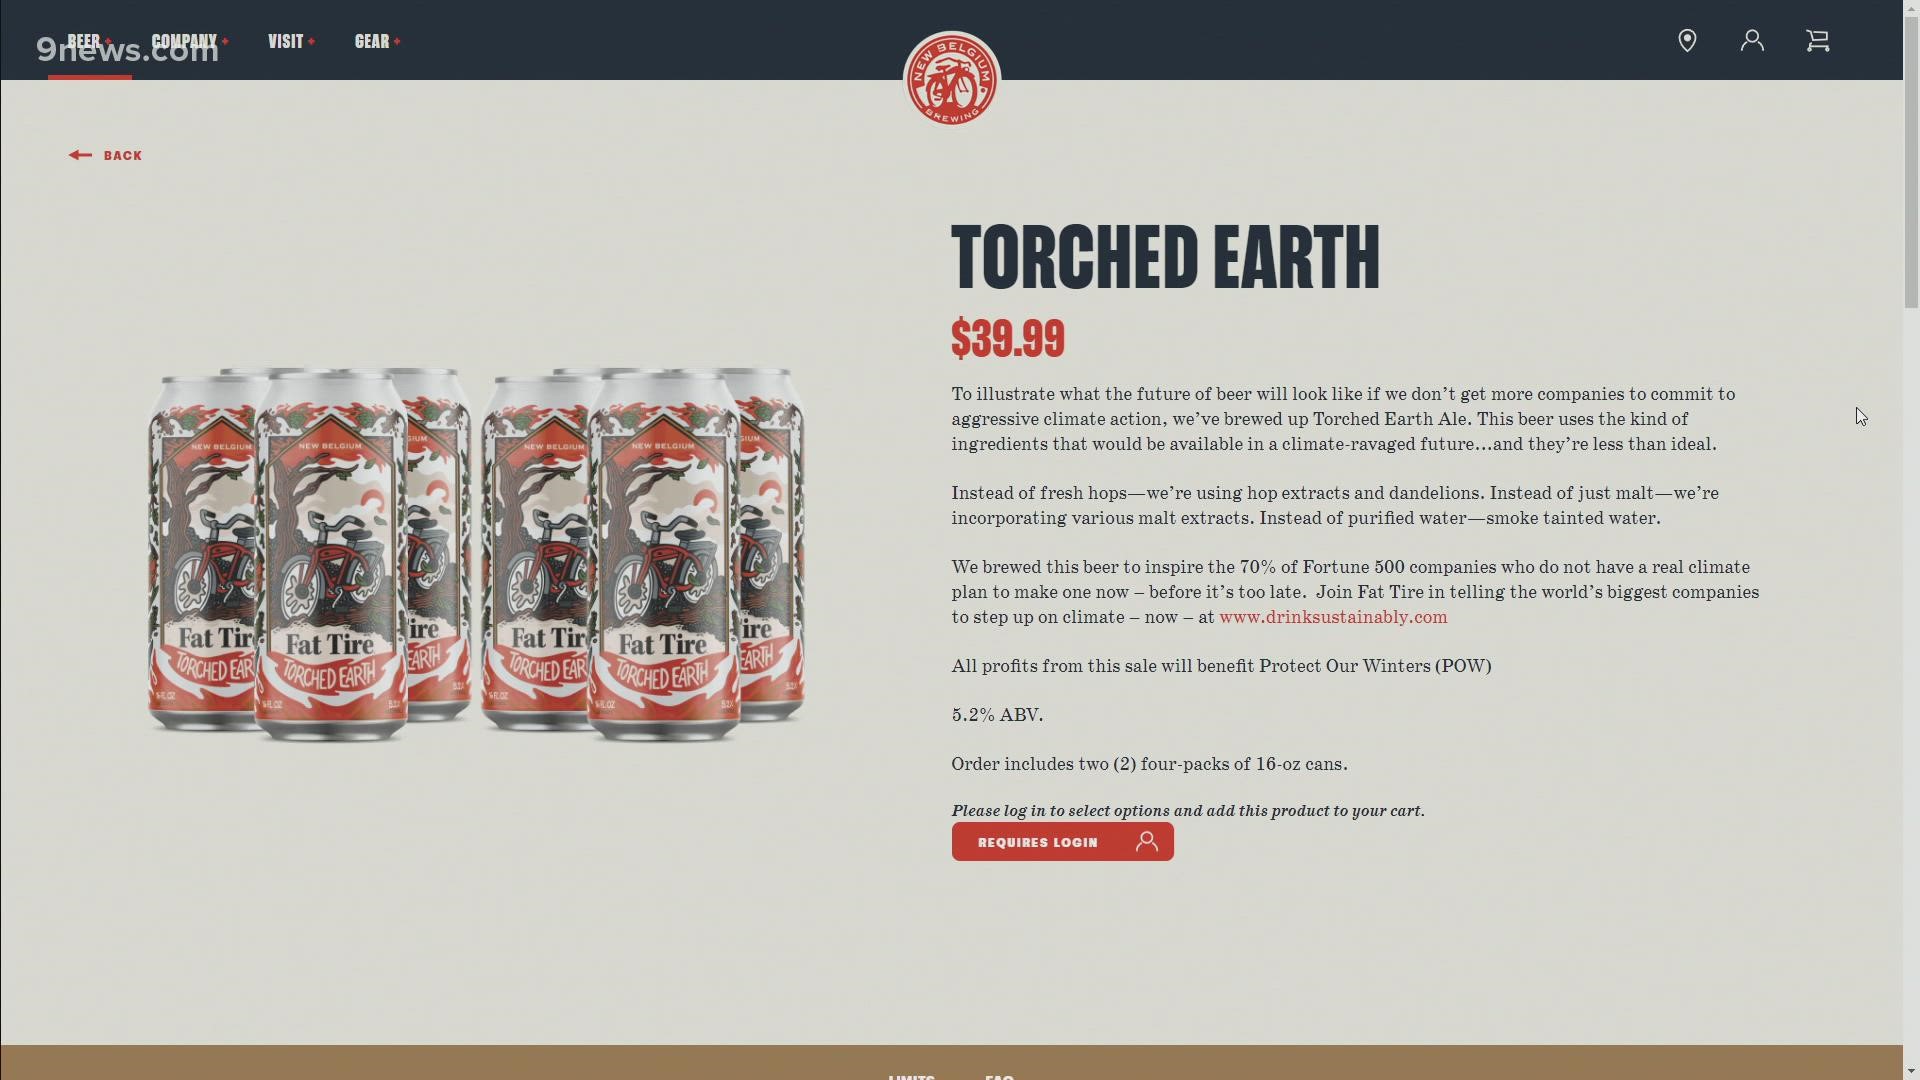 New Belgium brewery in Fort Collins lets you taste climate change in their new "Torched Earth" beer that "tastes like a band-aid."